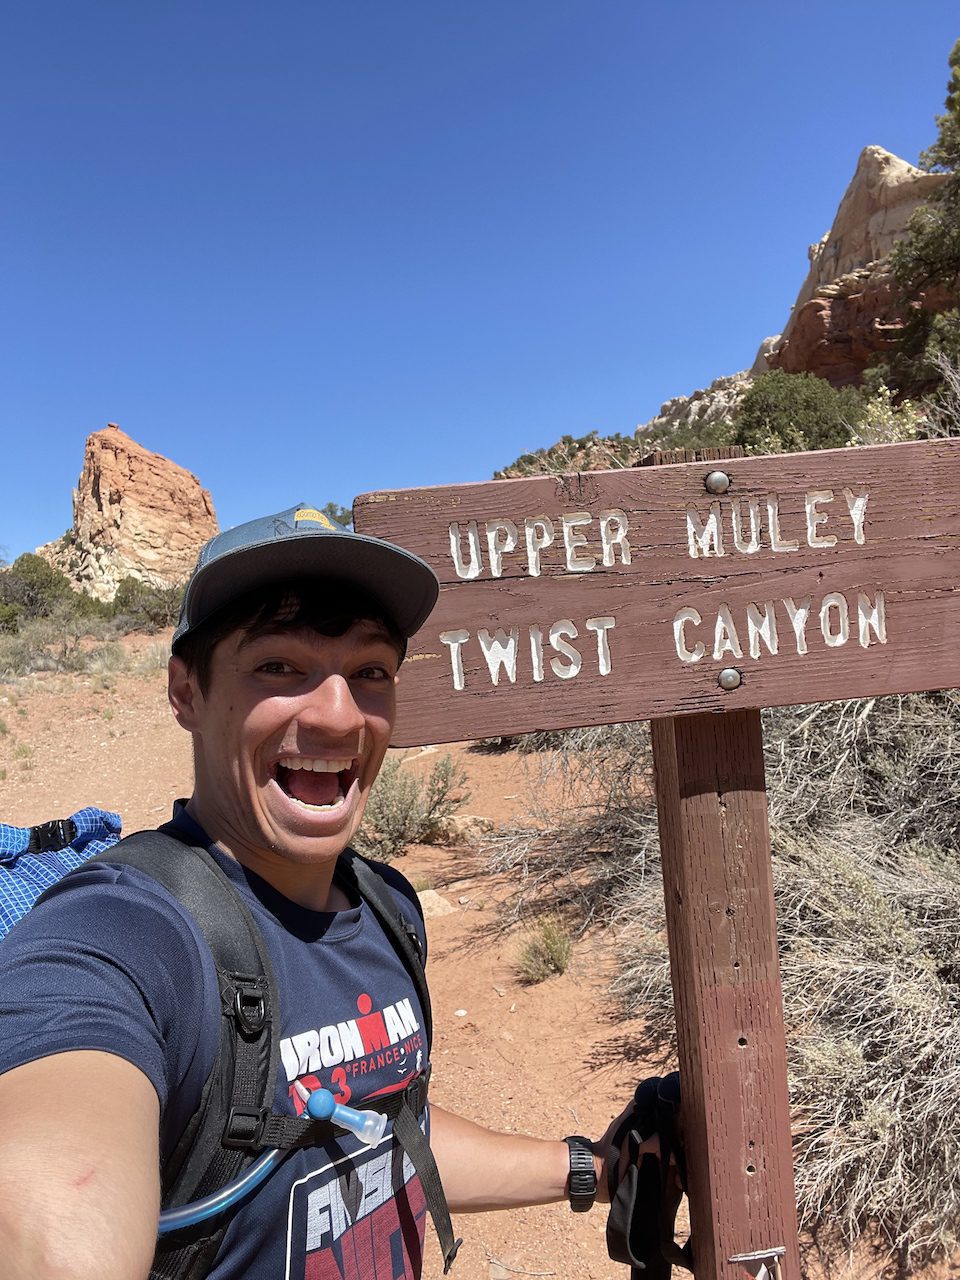 Backpacking The Upper Muley Twist In Capitol Reef National Park